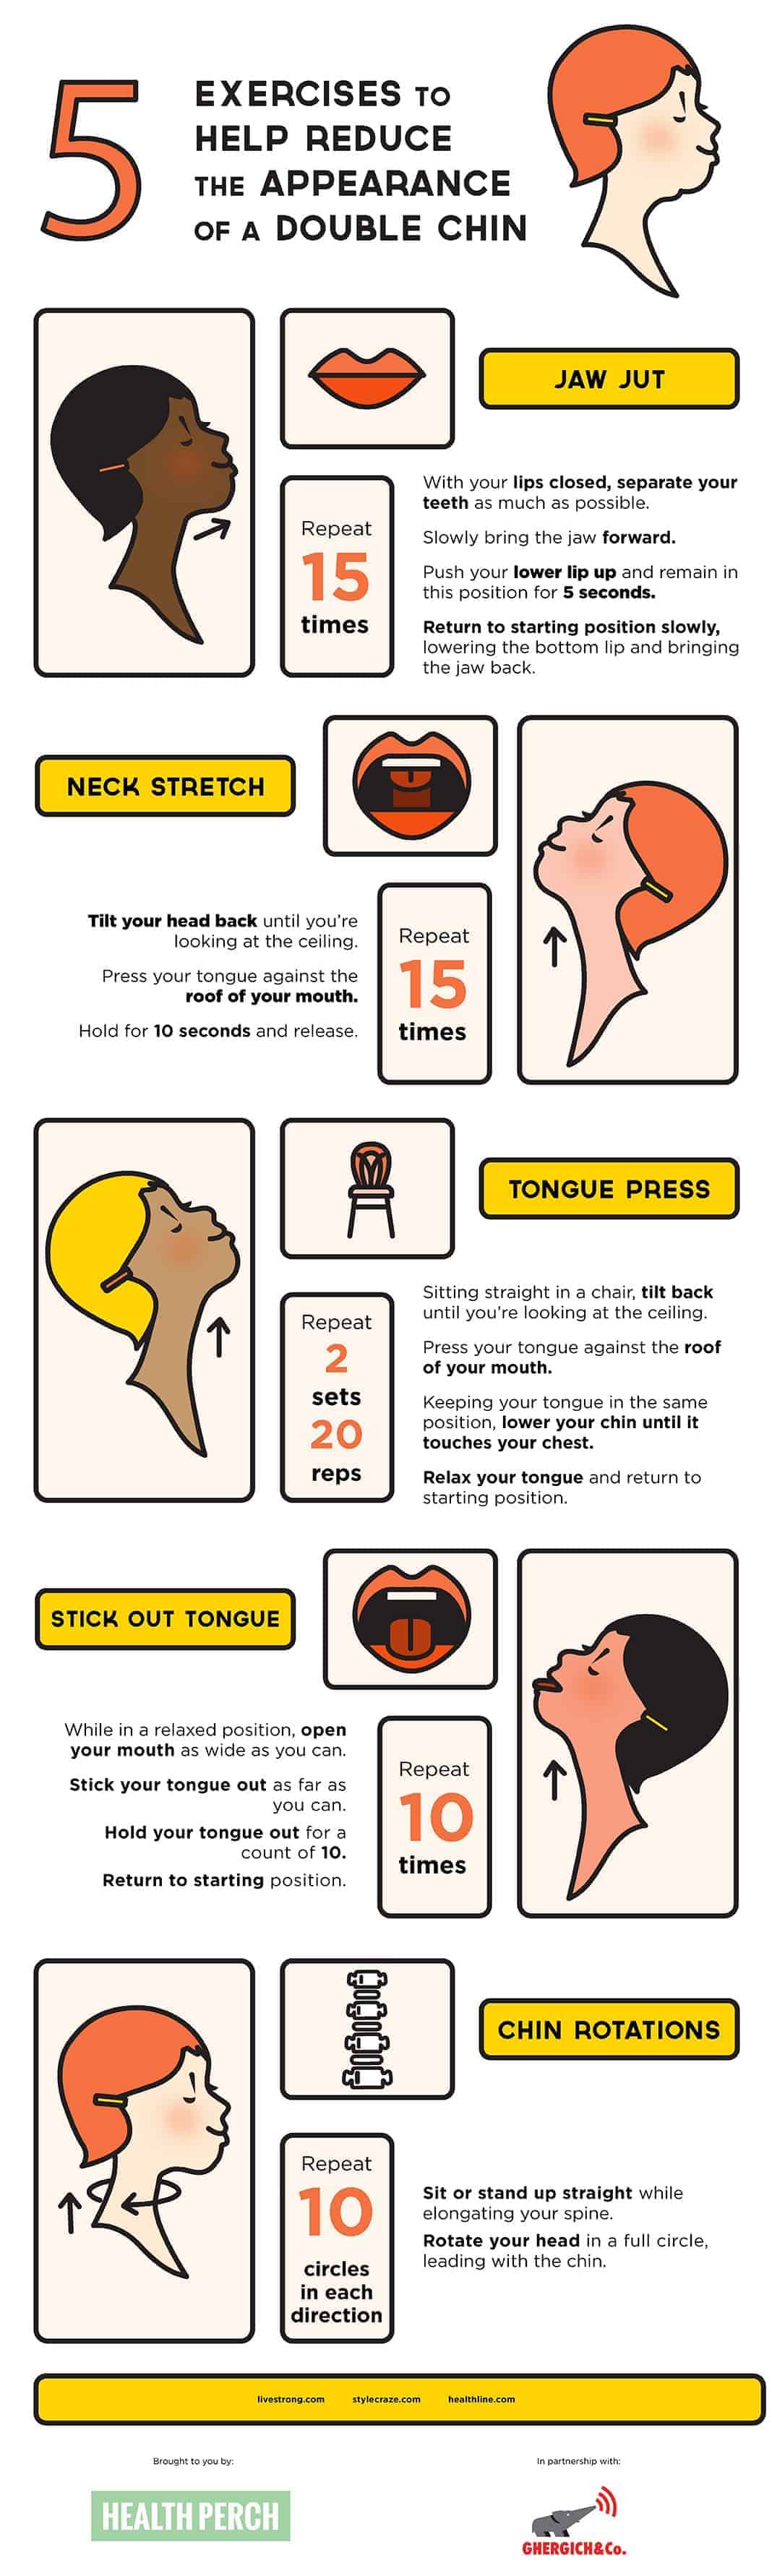 How to Reduce a Double Chin. Simple Exercises You Can Do Anywhere (Infographic) 1